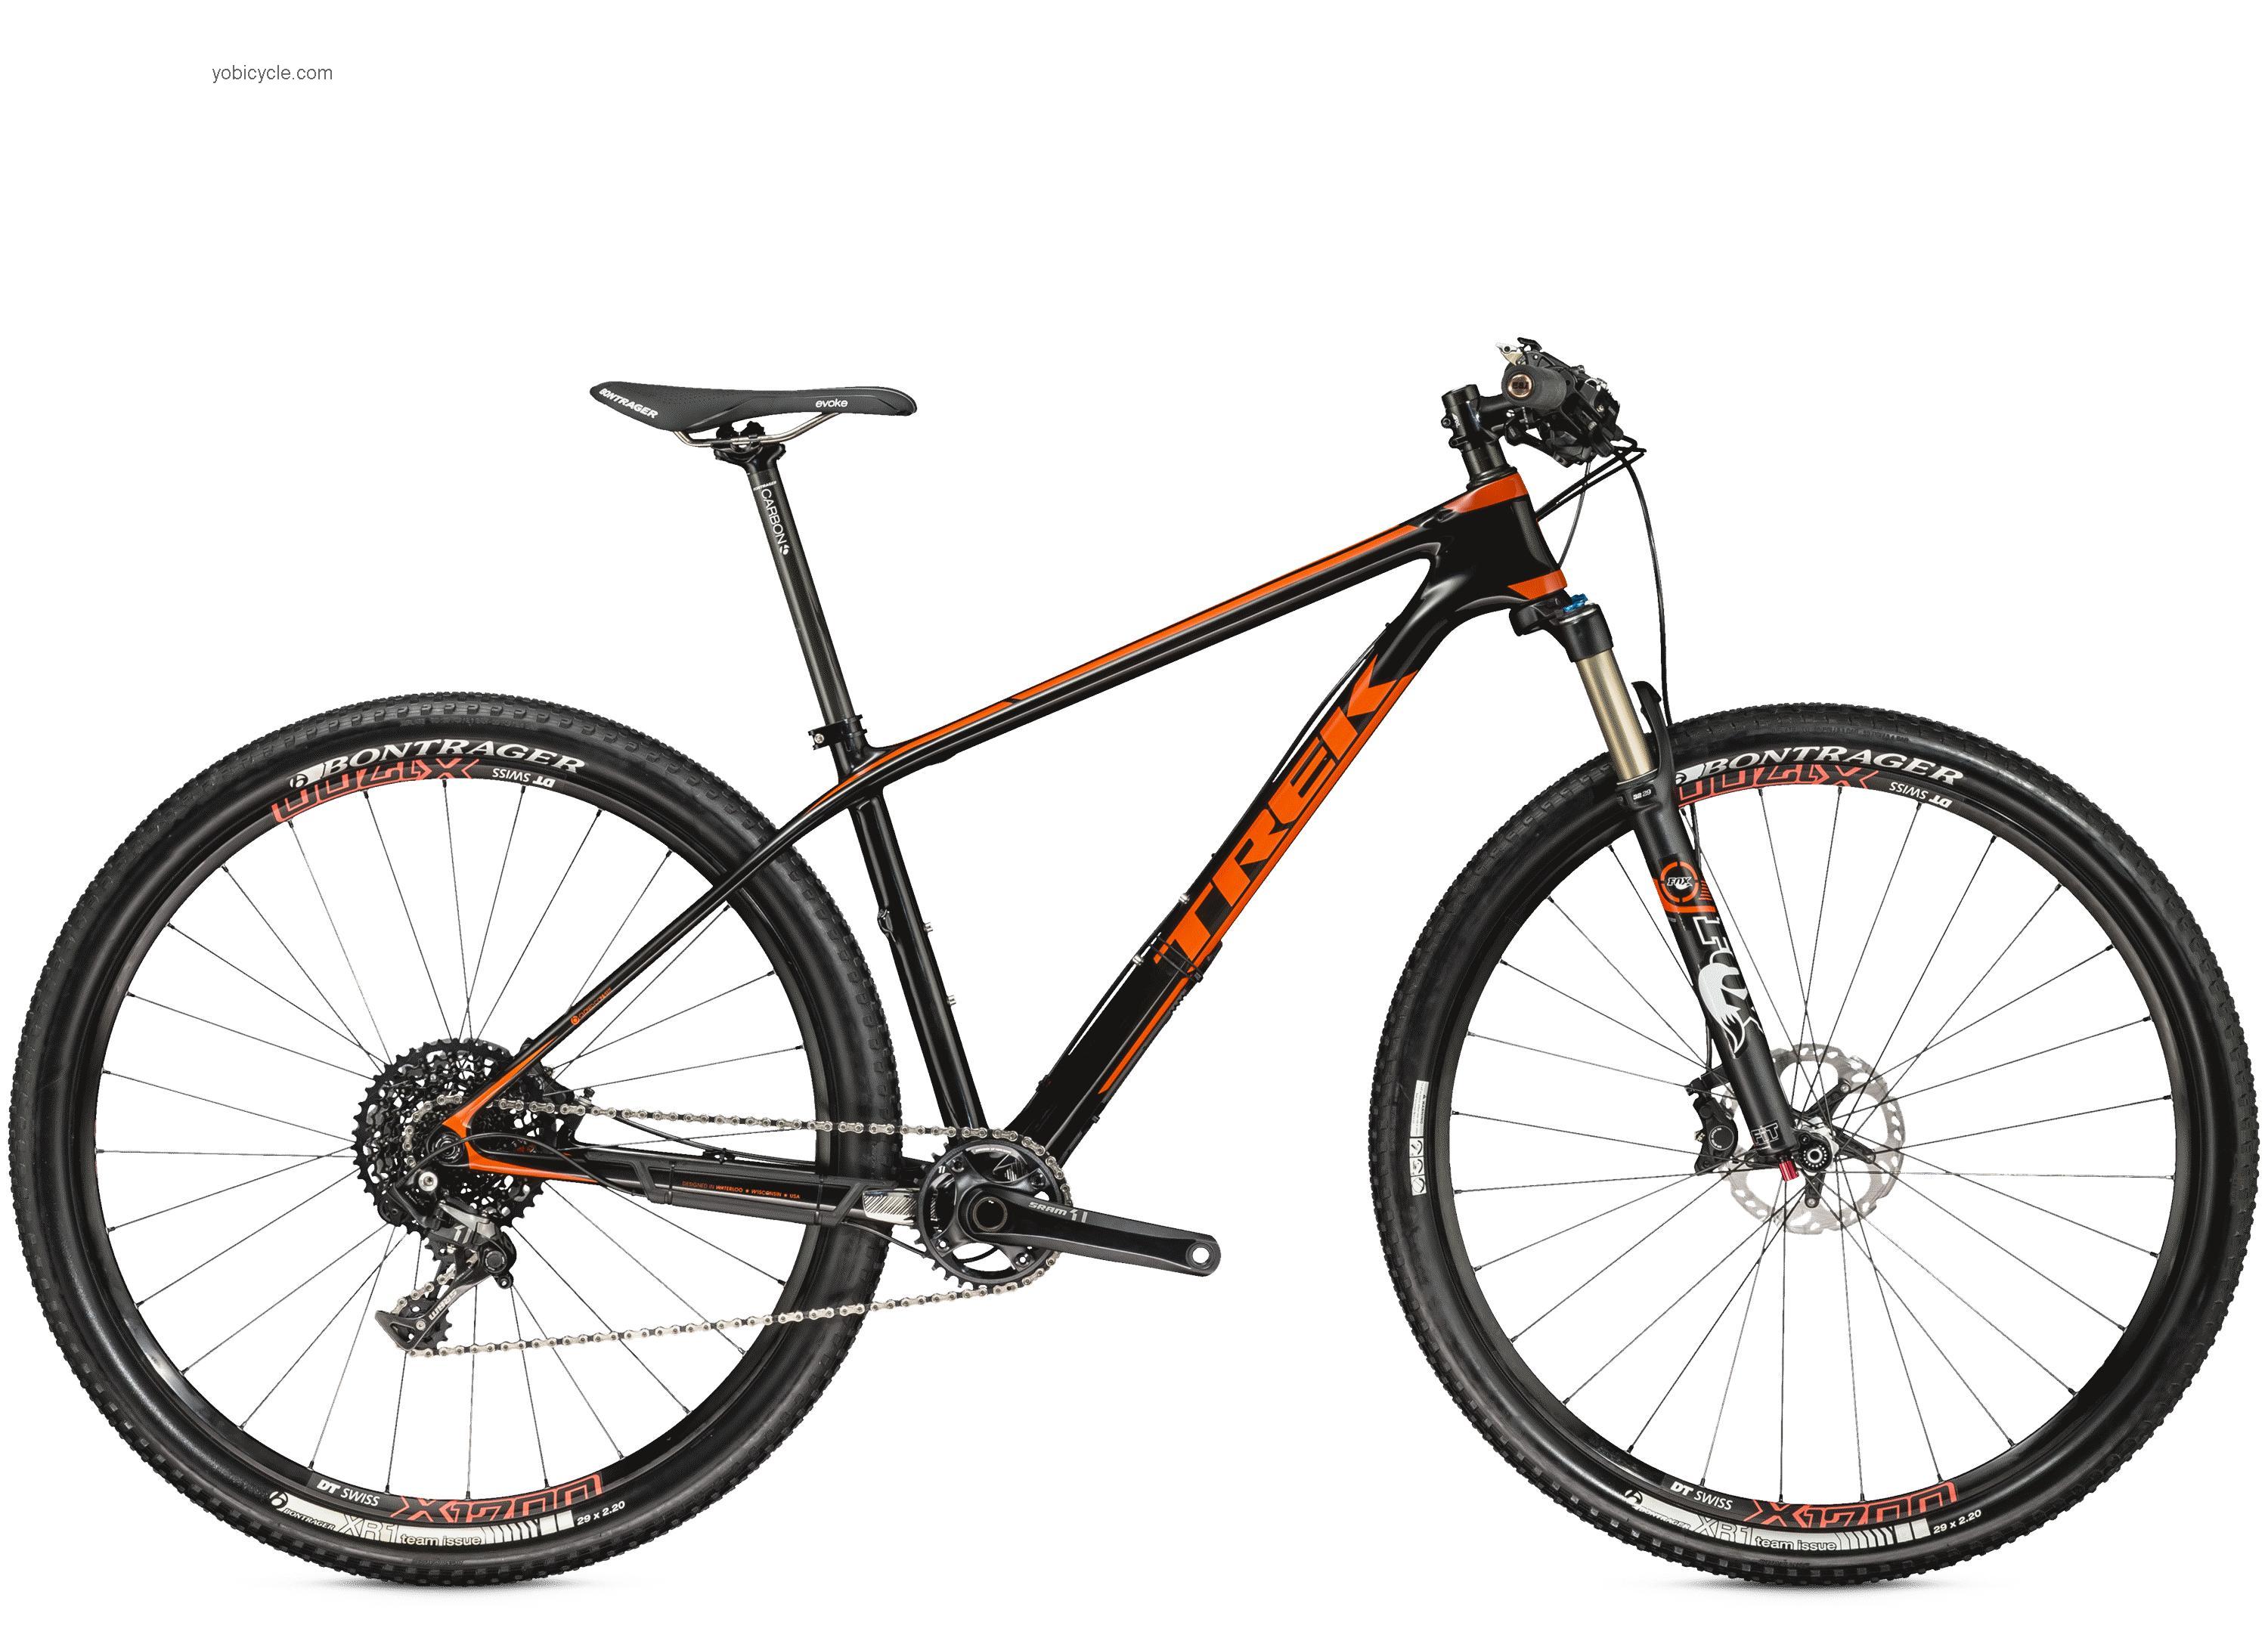 Trek Superfly 9.8 SL 2015 comparison online with competitors